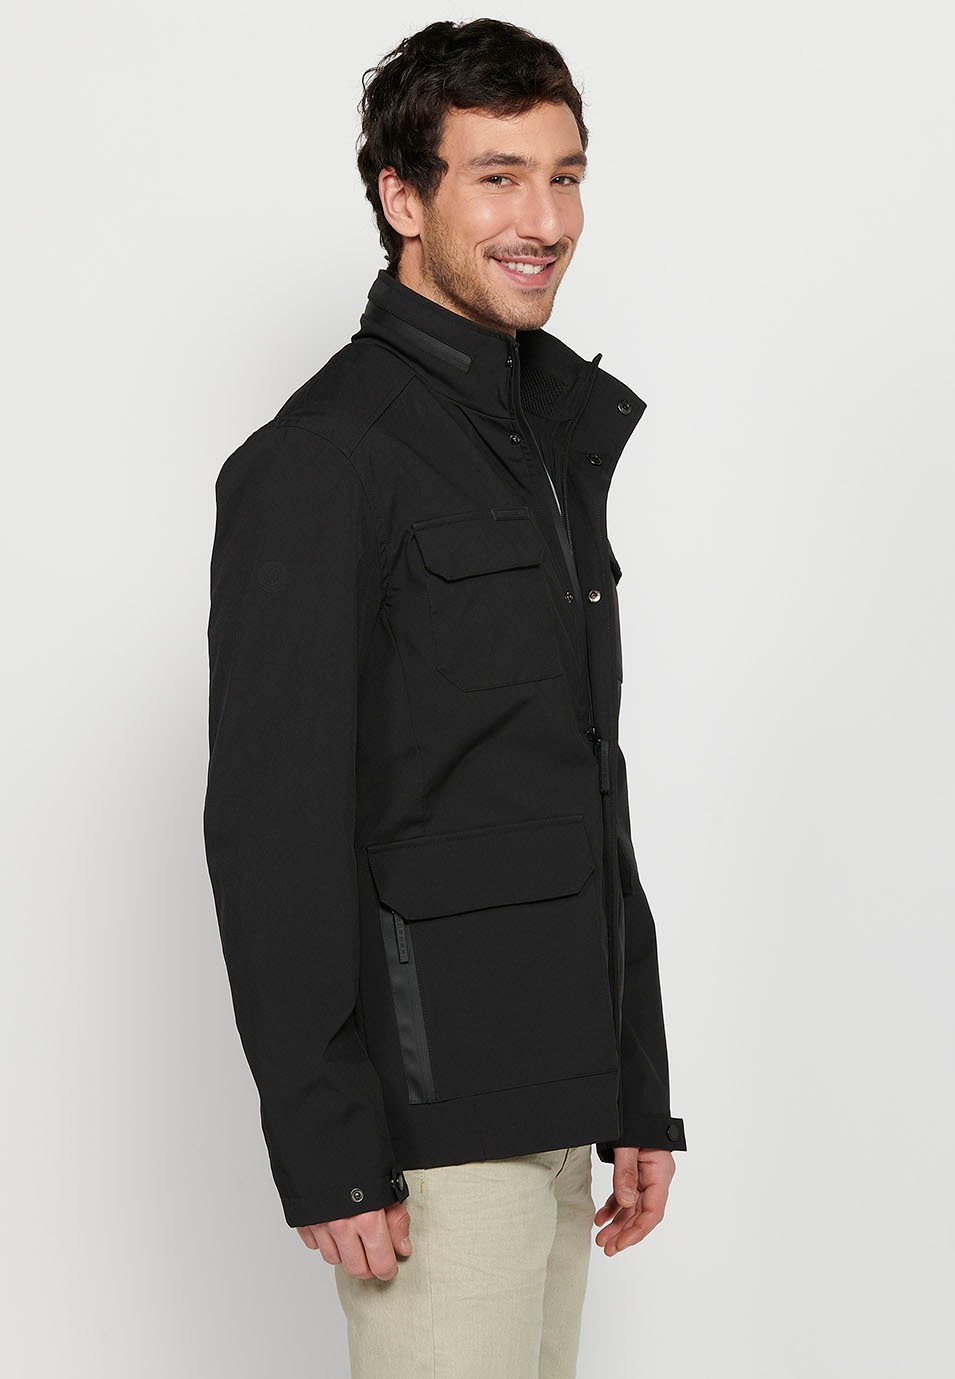 Long Black High Neck Windbreaker Jacket with Front Zipper Closure and Four Flap Pockets for Men 3